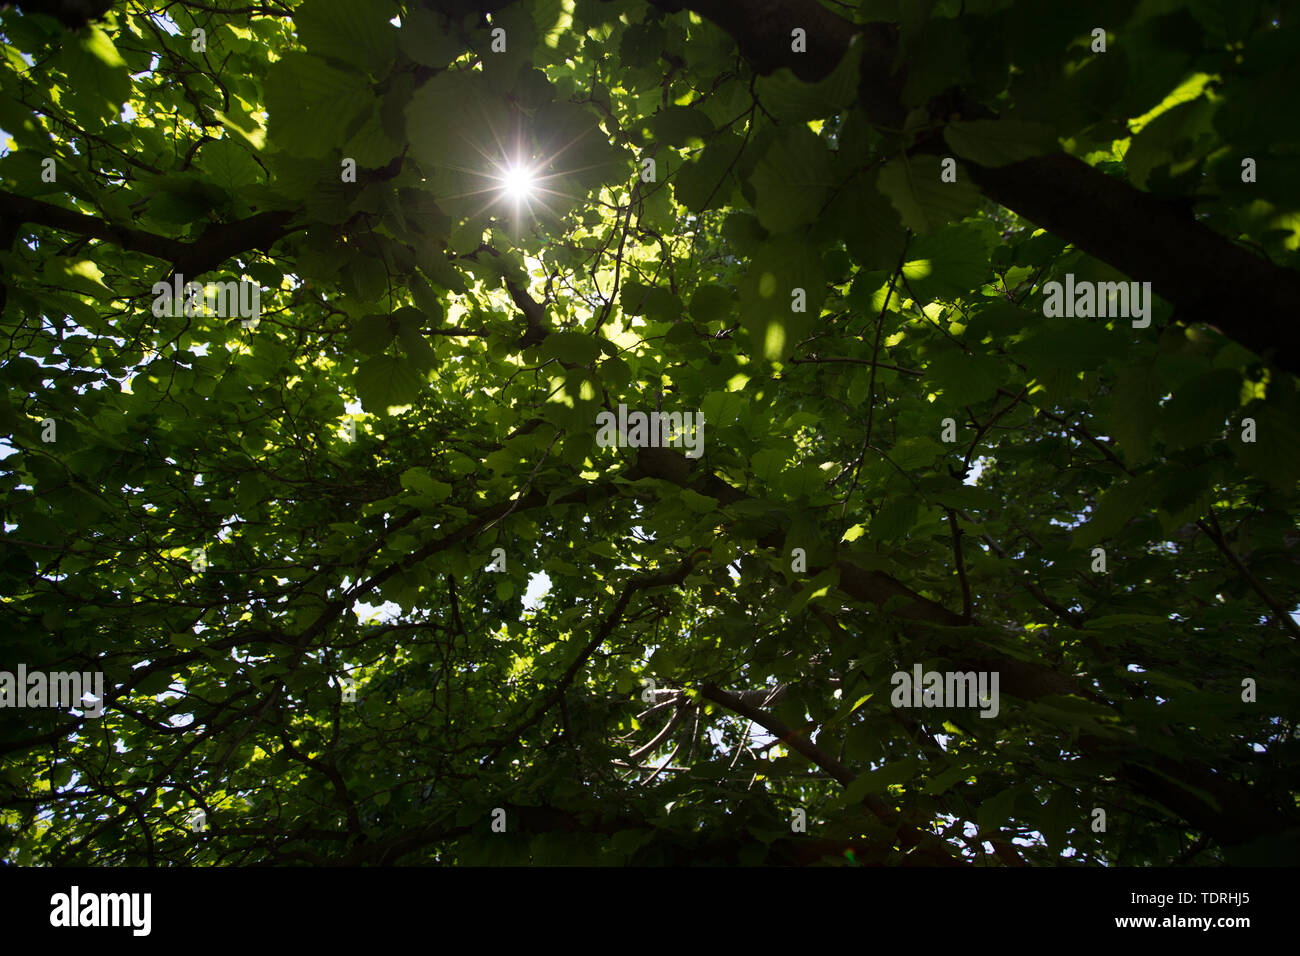 thick green leaves of the tree through which a ray of light breaks through the bottom view Stock Photo